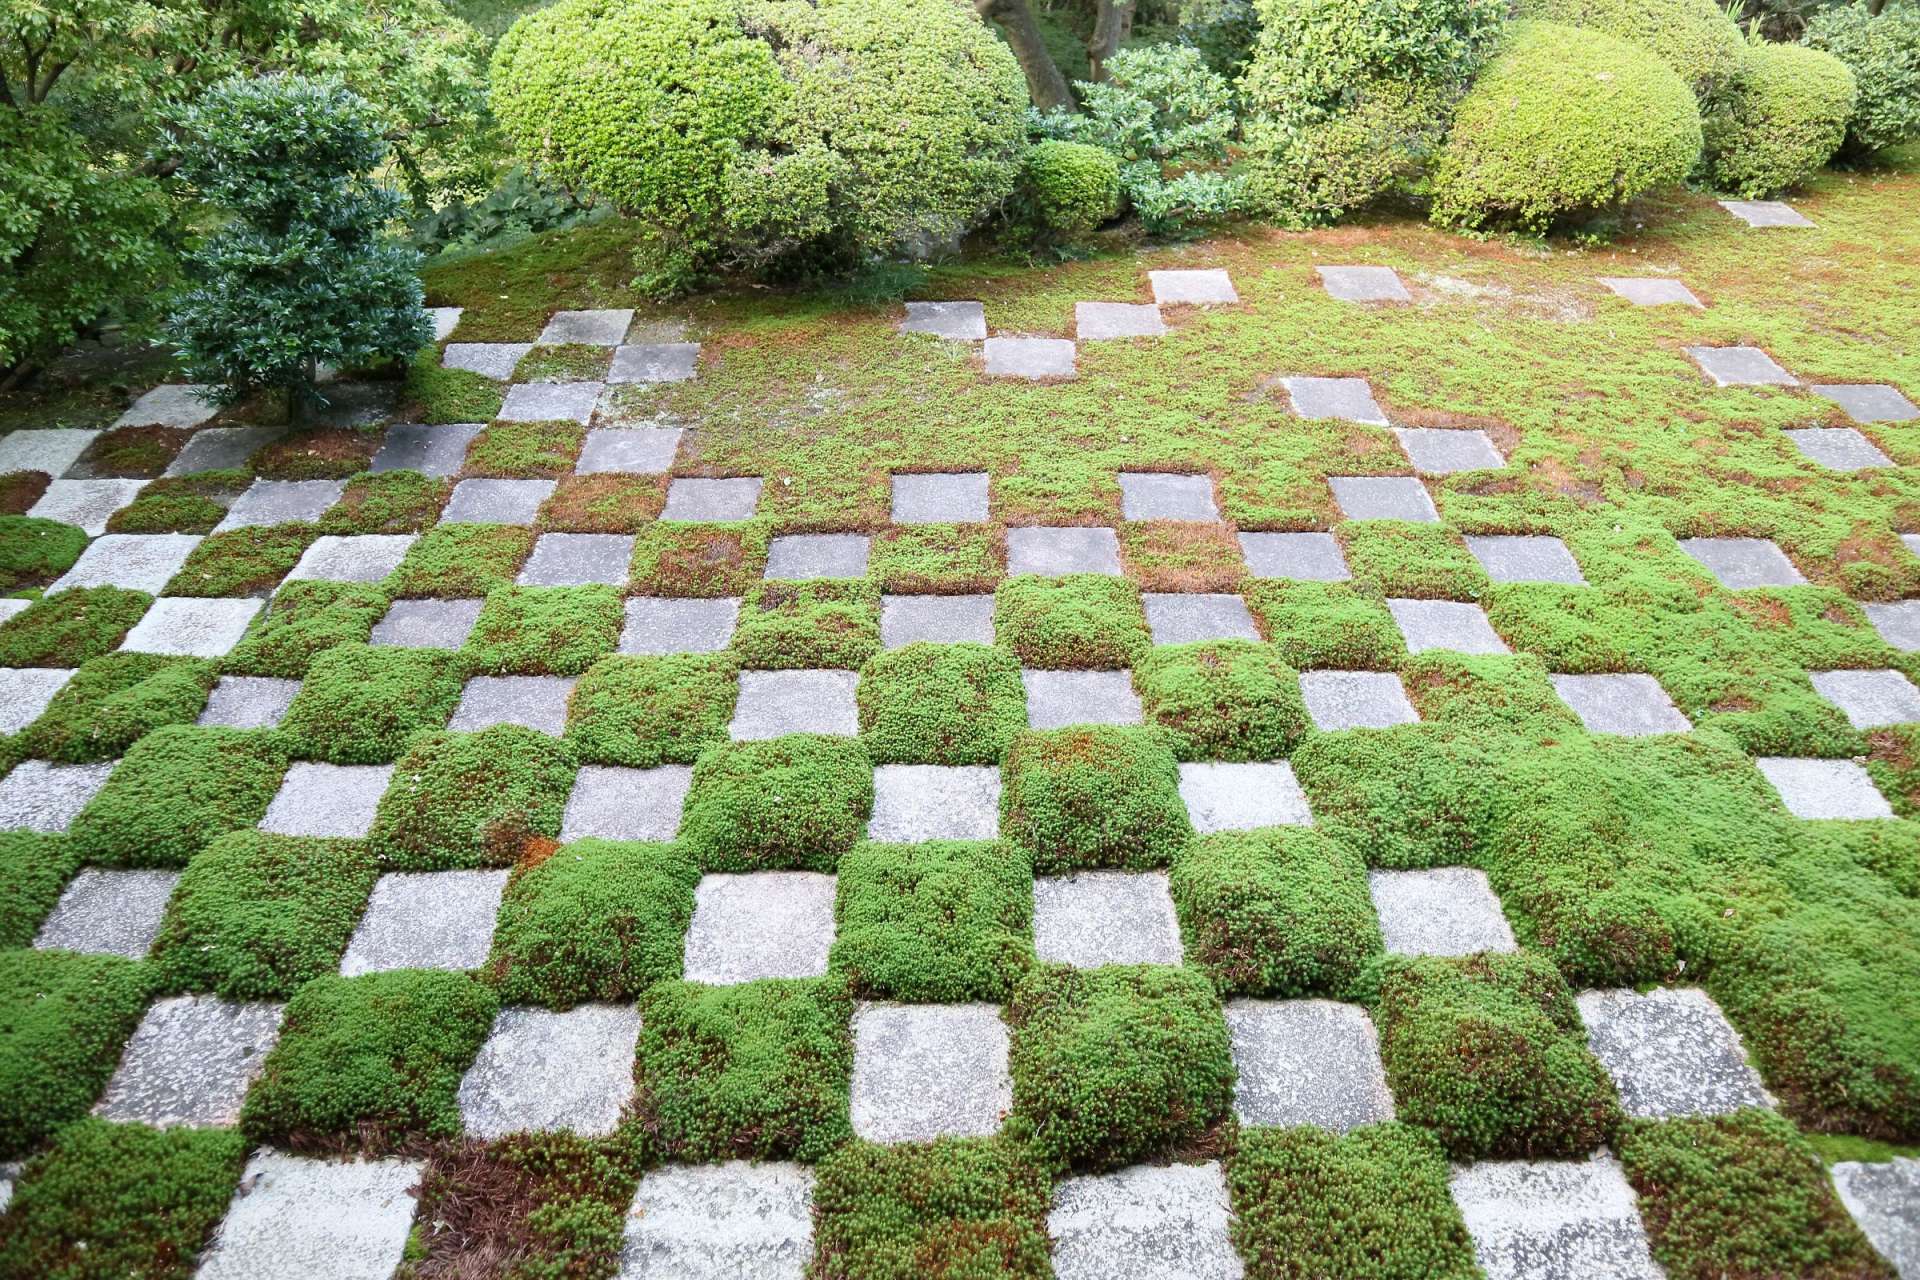 West Garden of Tofukuji Hojo Garden, also known as Hasso-no-Niwa.
The checkered pattern of stones and moss creates an impressive effect.
（c）Chisao Shigemori
